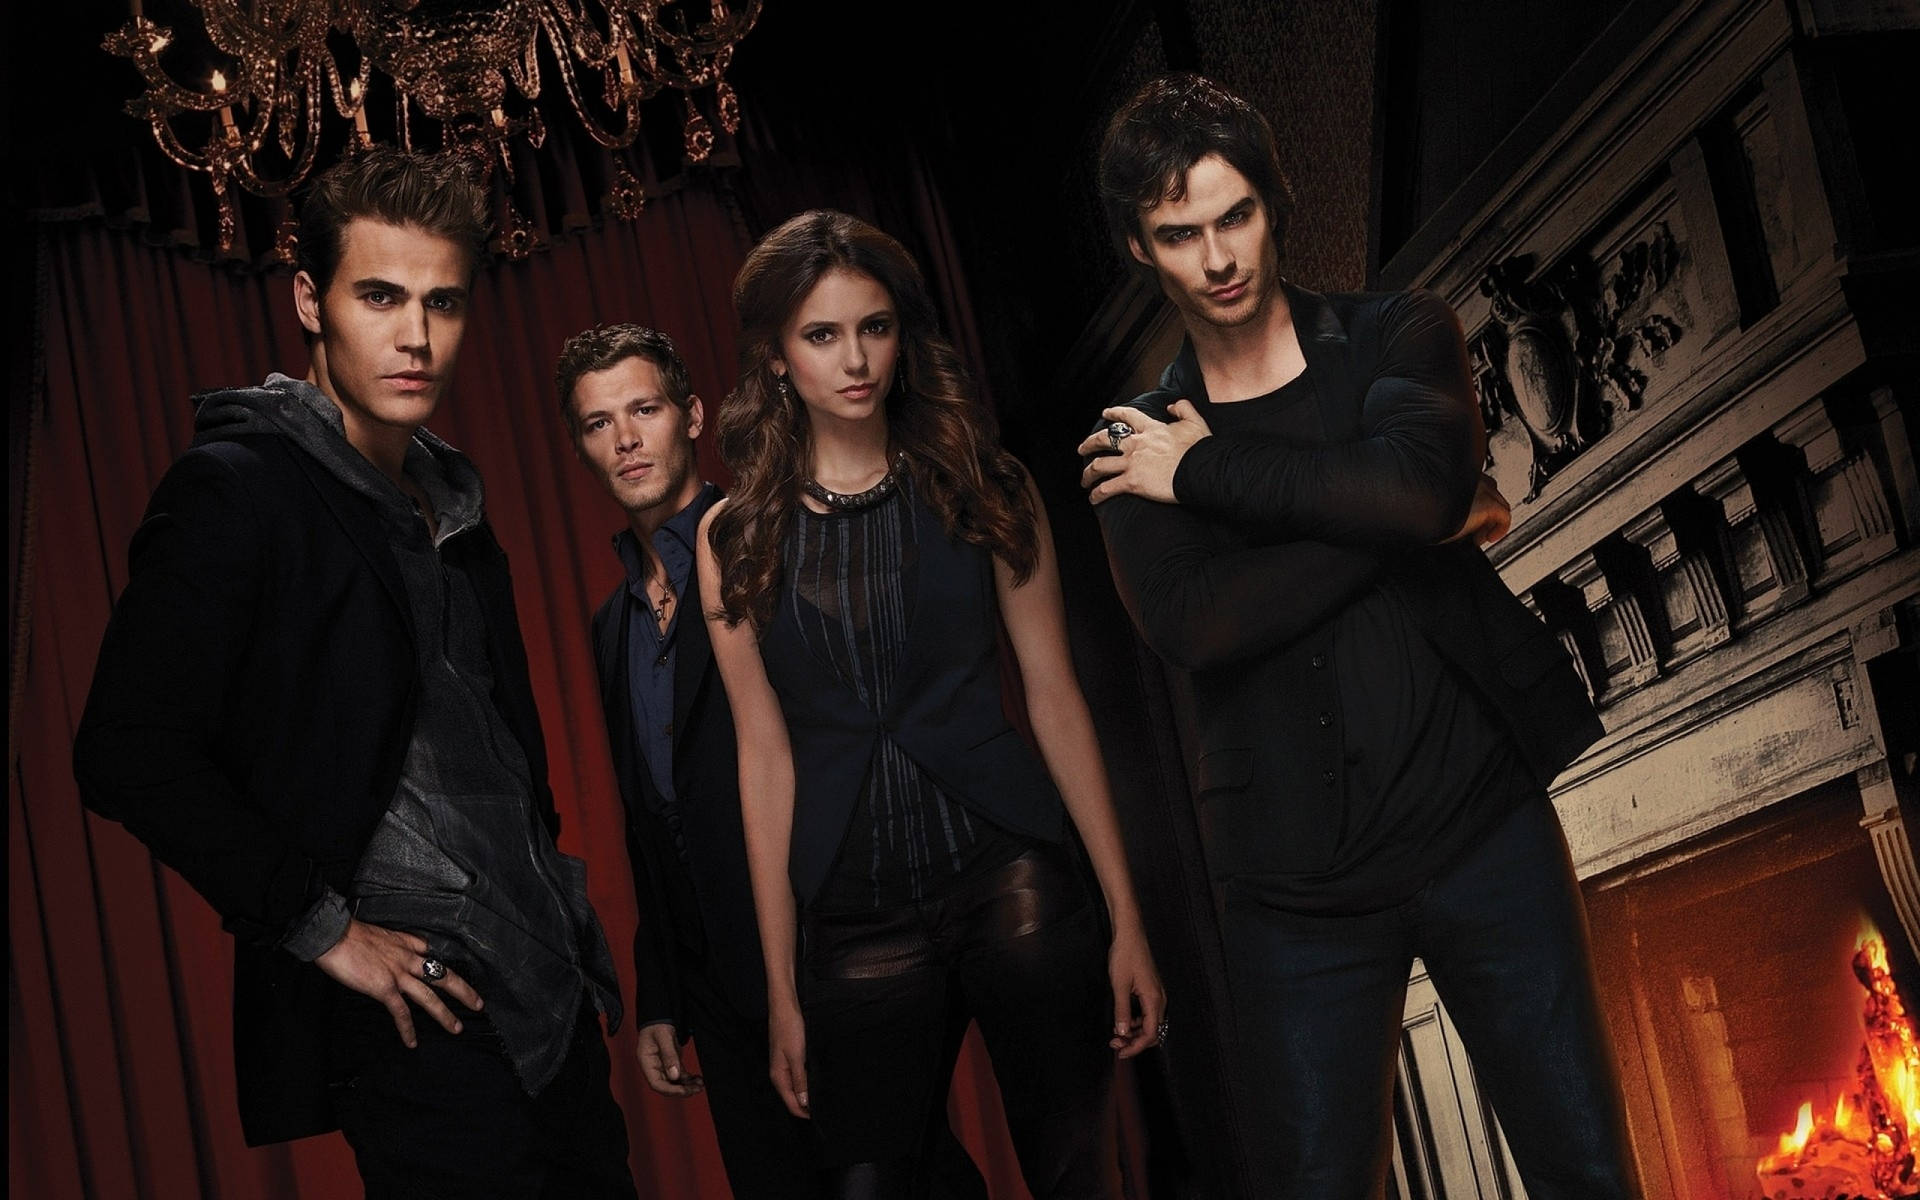 The Vampire Diaries Cast In Old Vintage Study Wallpaper